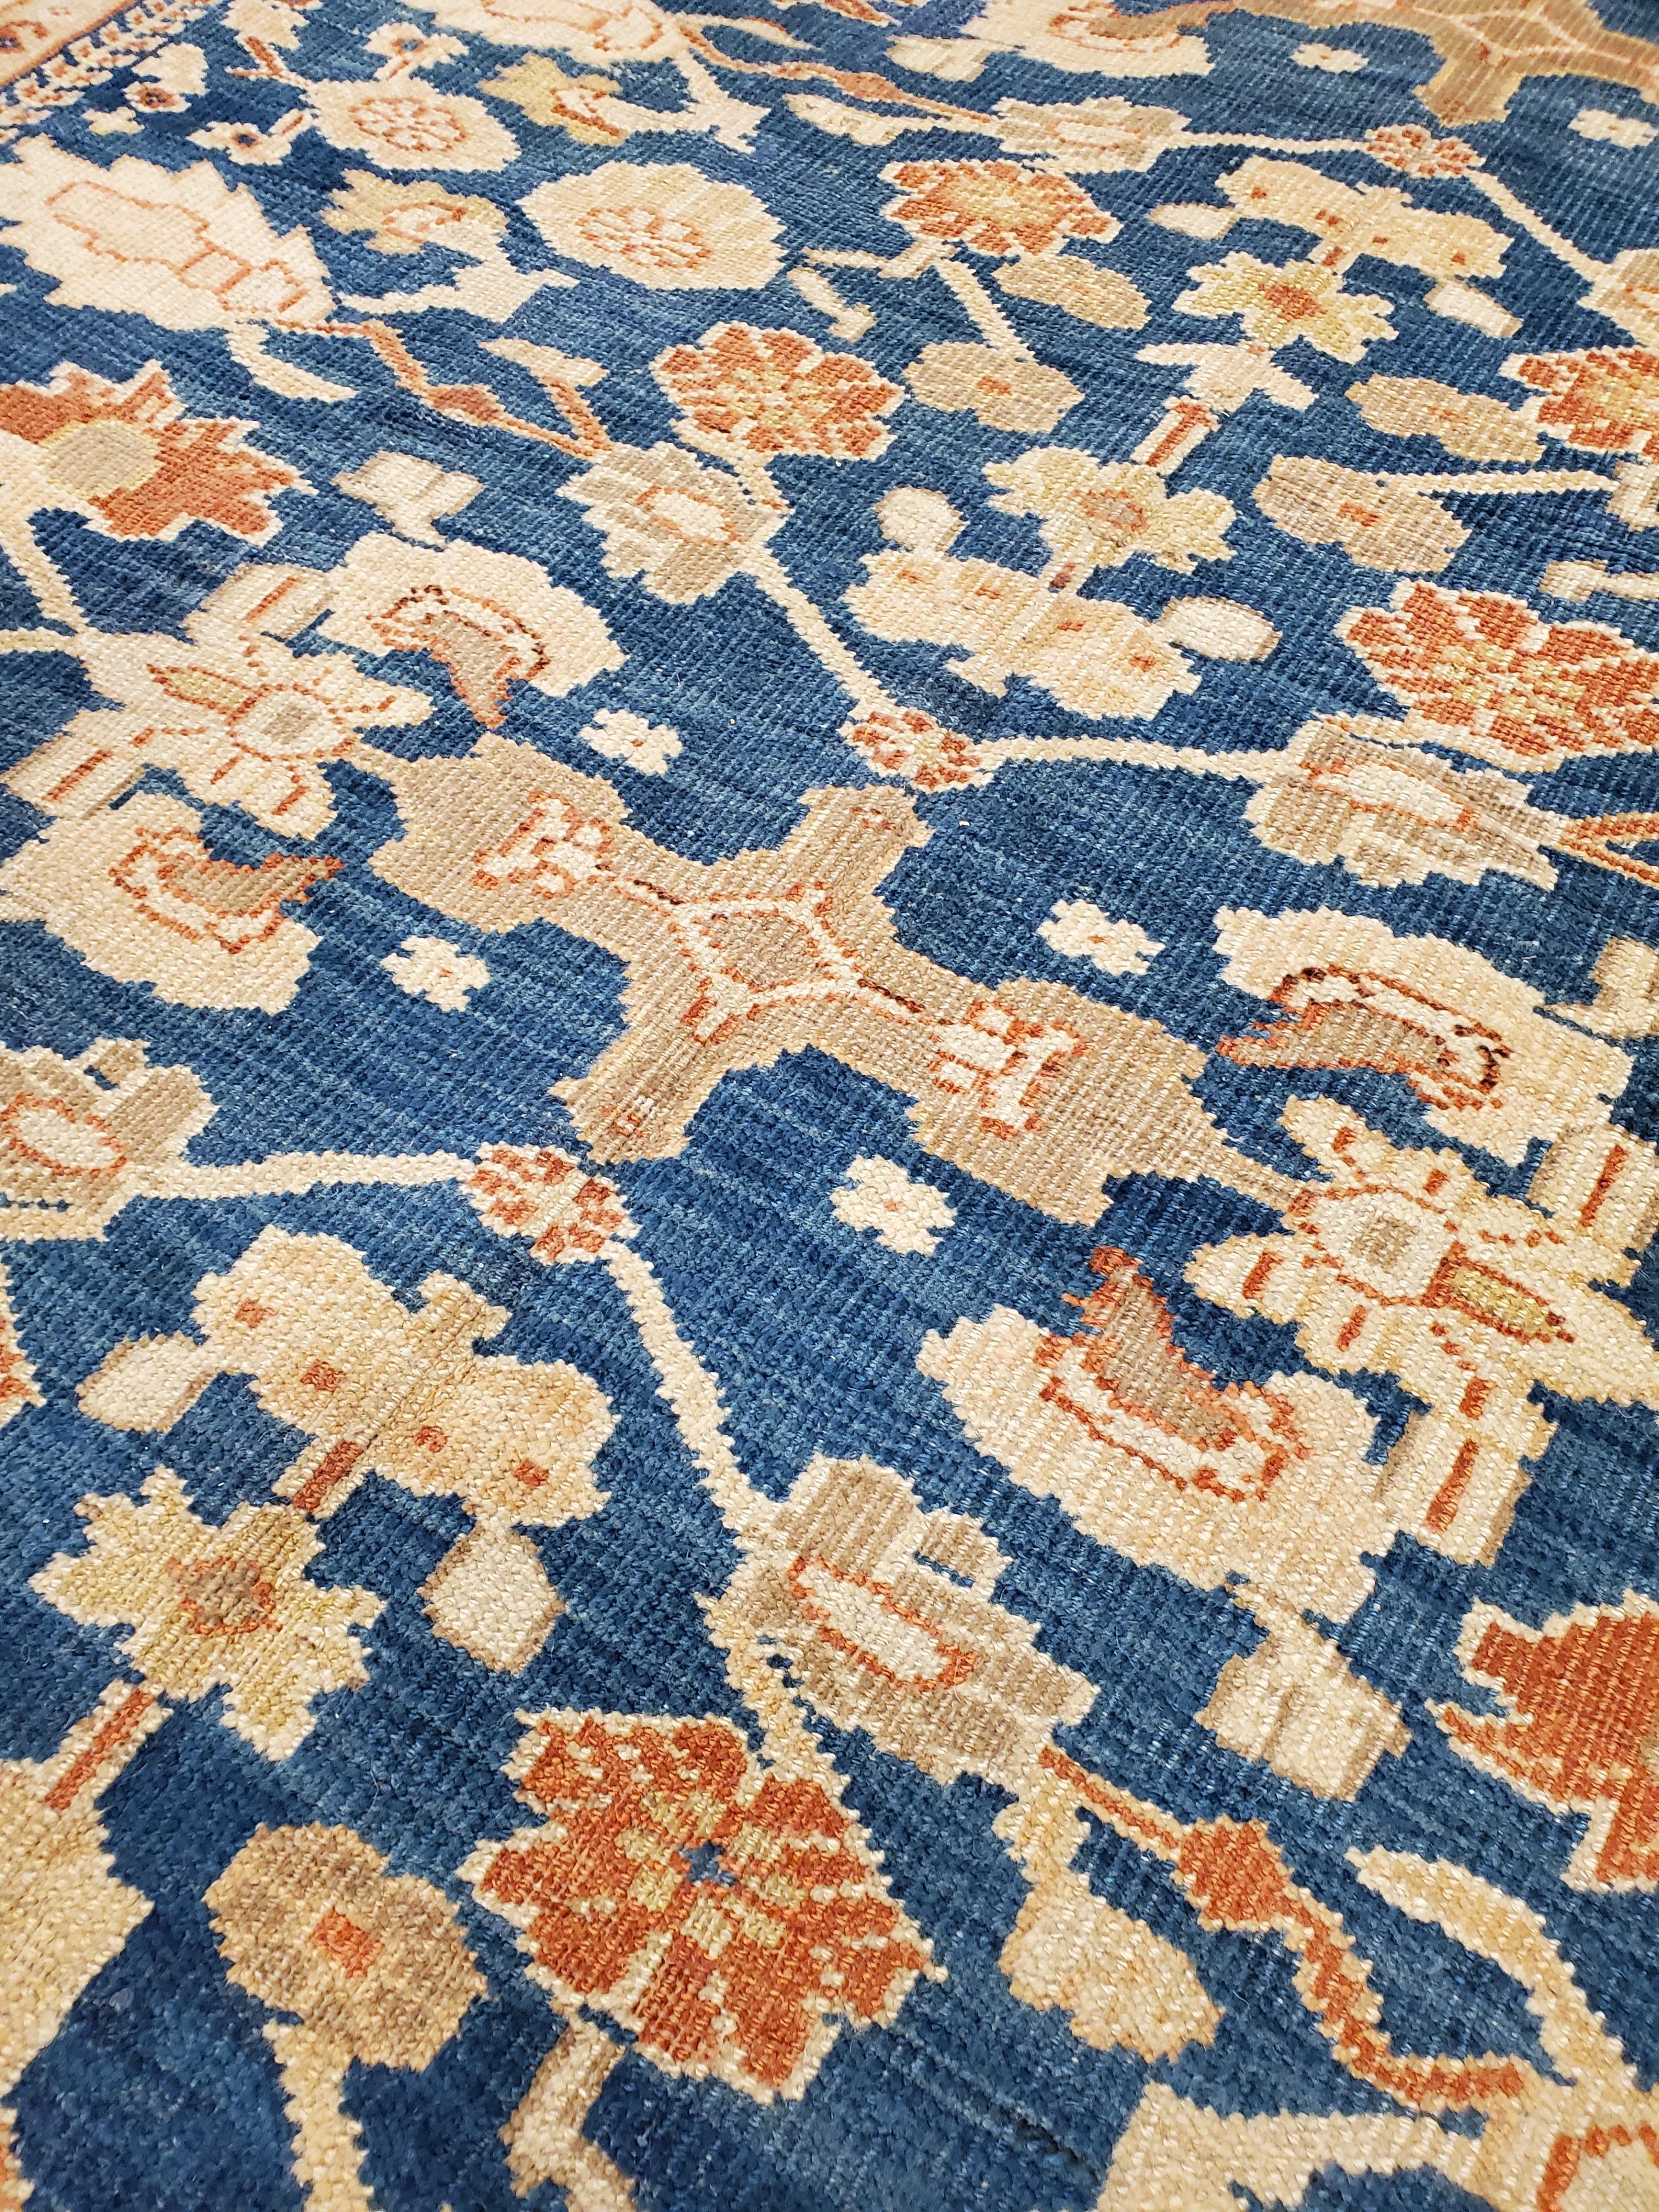 Antique Persian Sultanabad Carpet, Handmade Oriental Rug, Light Blue, Terracotta In Excellent Condition For Sale In Port Washington, NY